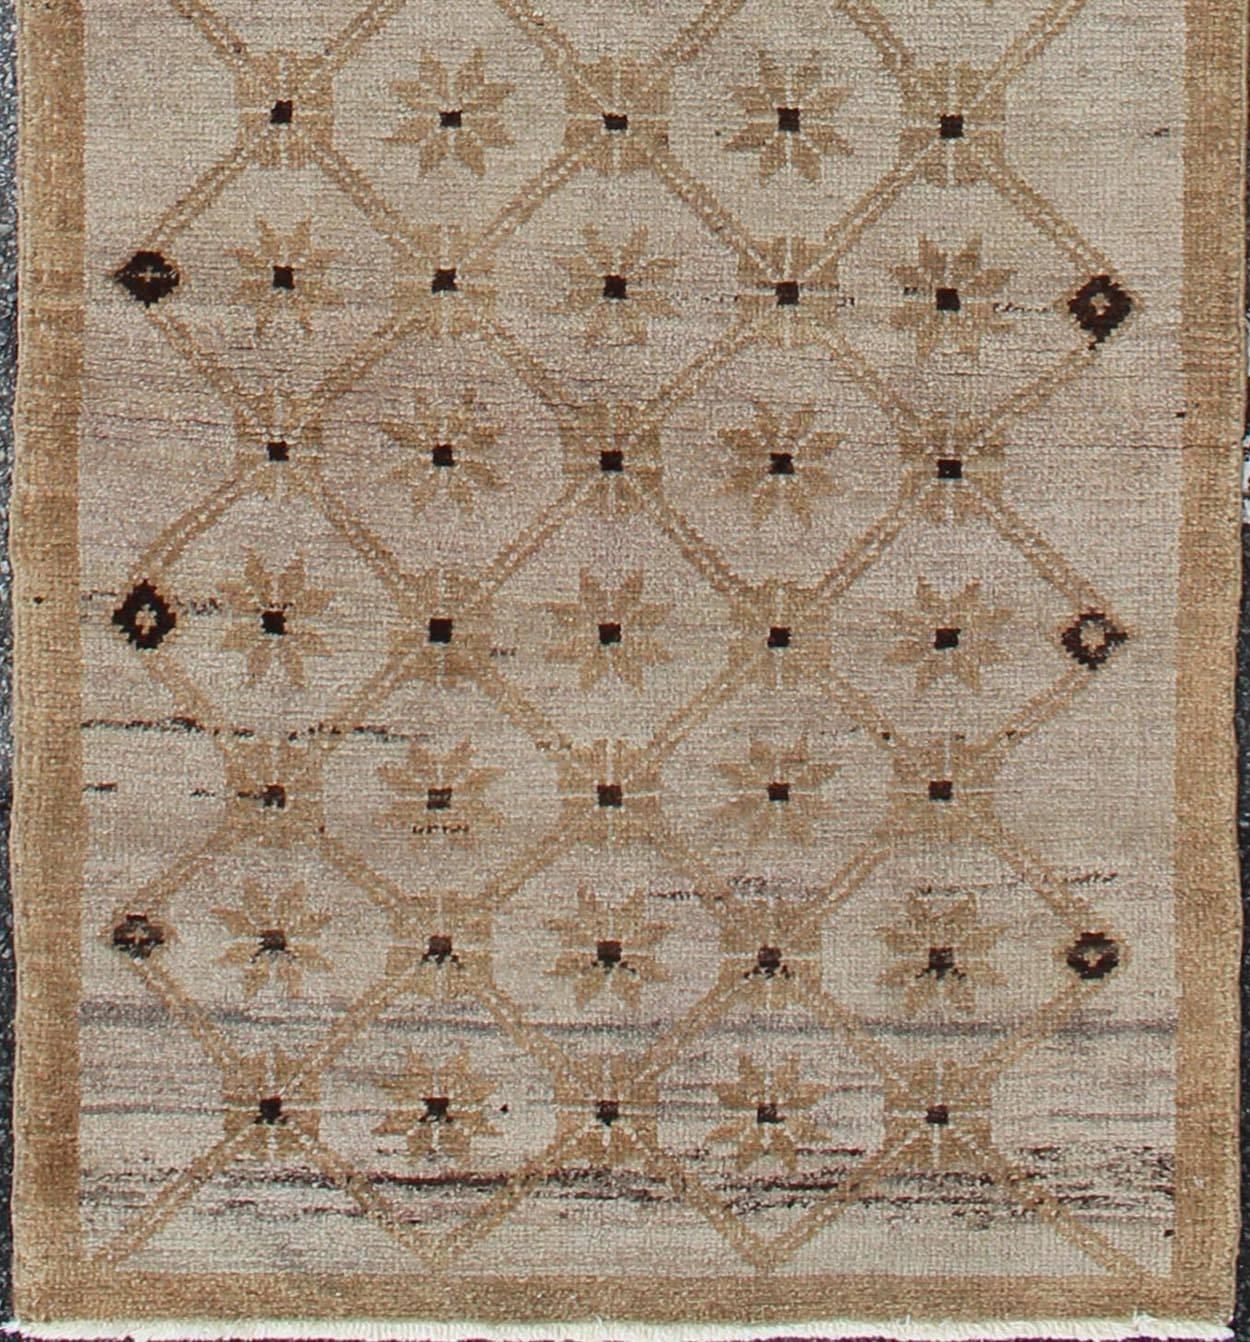  vintage unique runner with Latticework design in taupe, Khaki and light camel highlights tu-alg-477, country of origin / type: Turkey / Oushak, circa mid-20th century

This vintage Turkish runner (circa mid-20th century) features an all-over